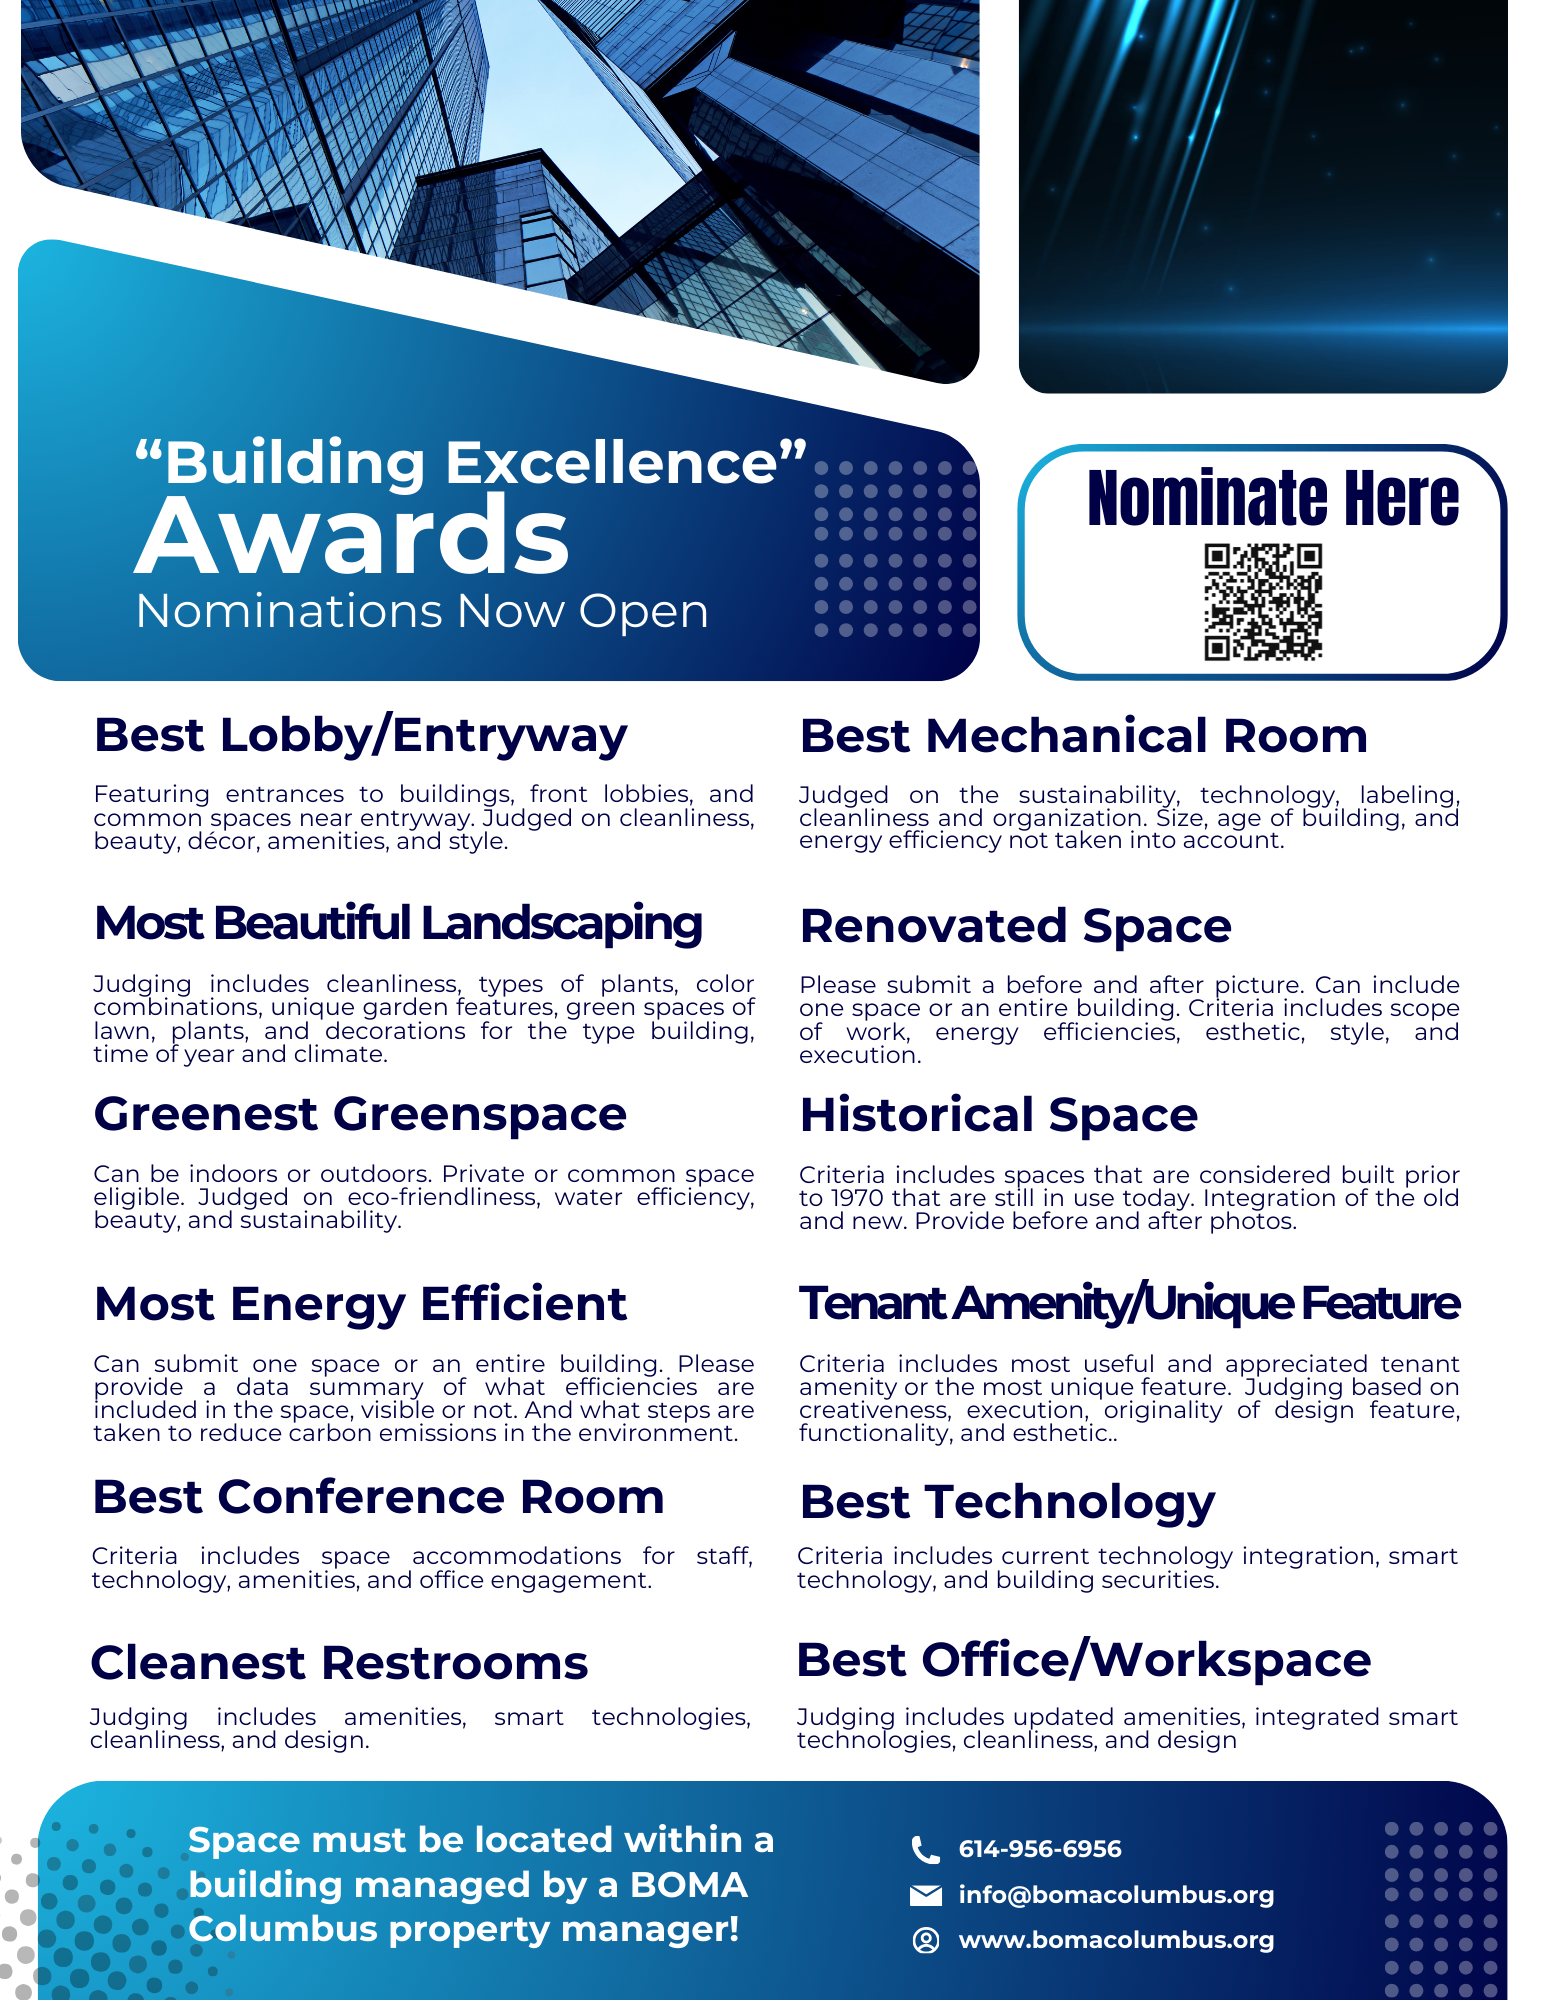 Building Excellence Awards